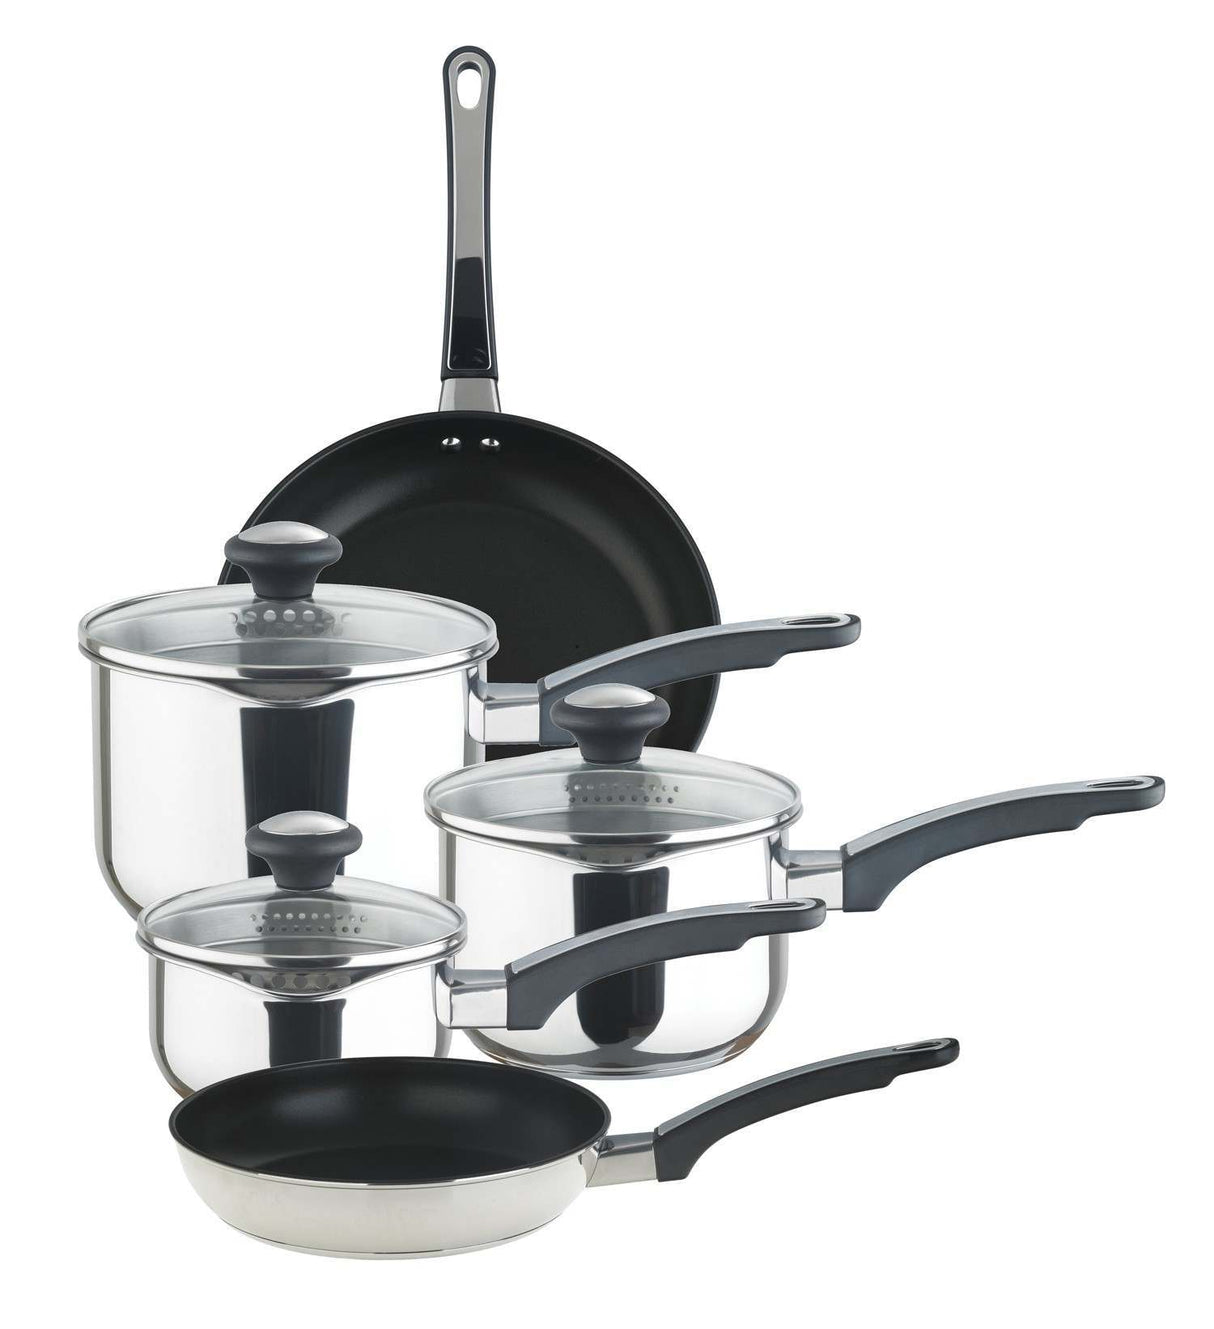 Prestige 5 Piece Everyday Straining Pan Set with Non-Stick Frying Pans